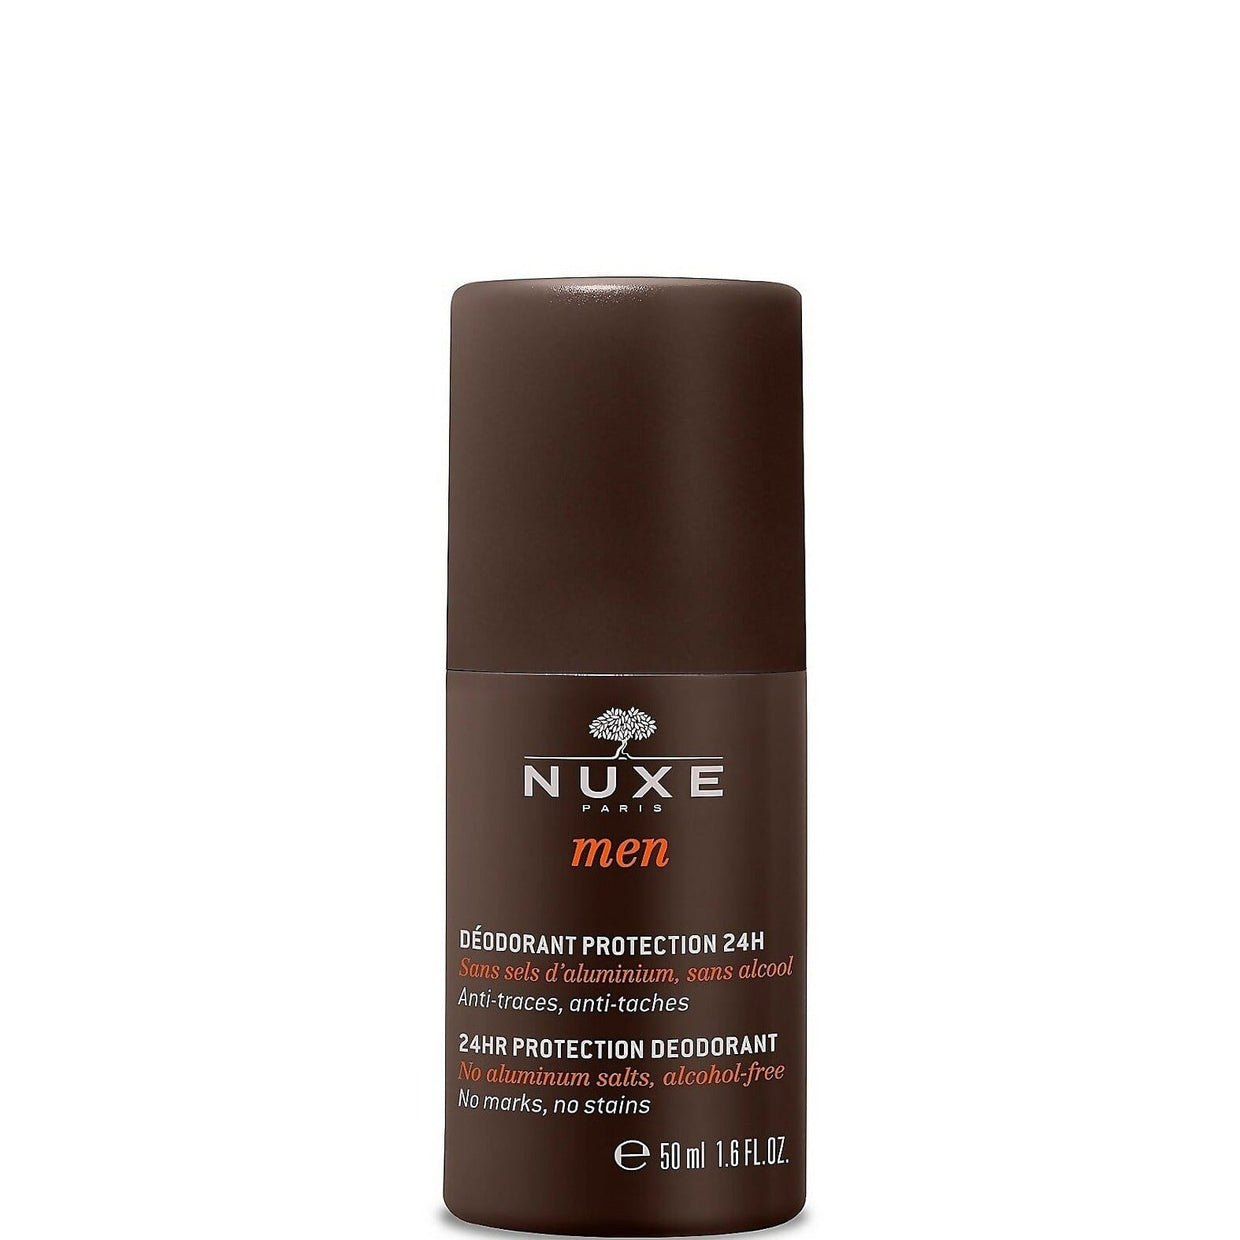 Nuxe Men's 24 Hour Protection Deodorant Nuxe 50 ml Shop at Exclusive Beauty Club